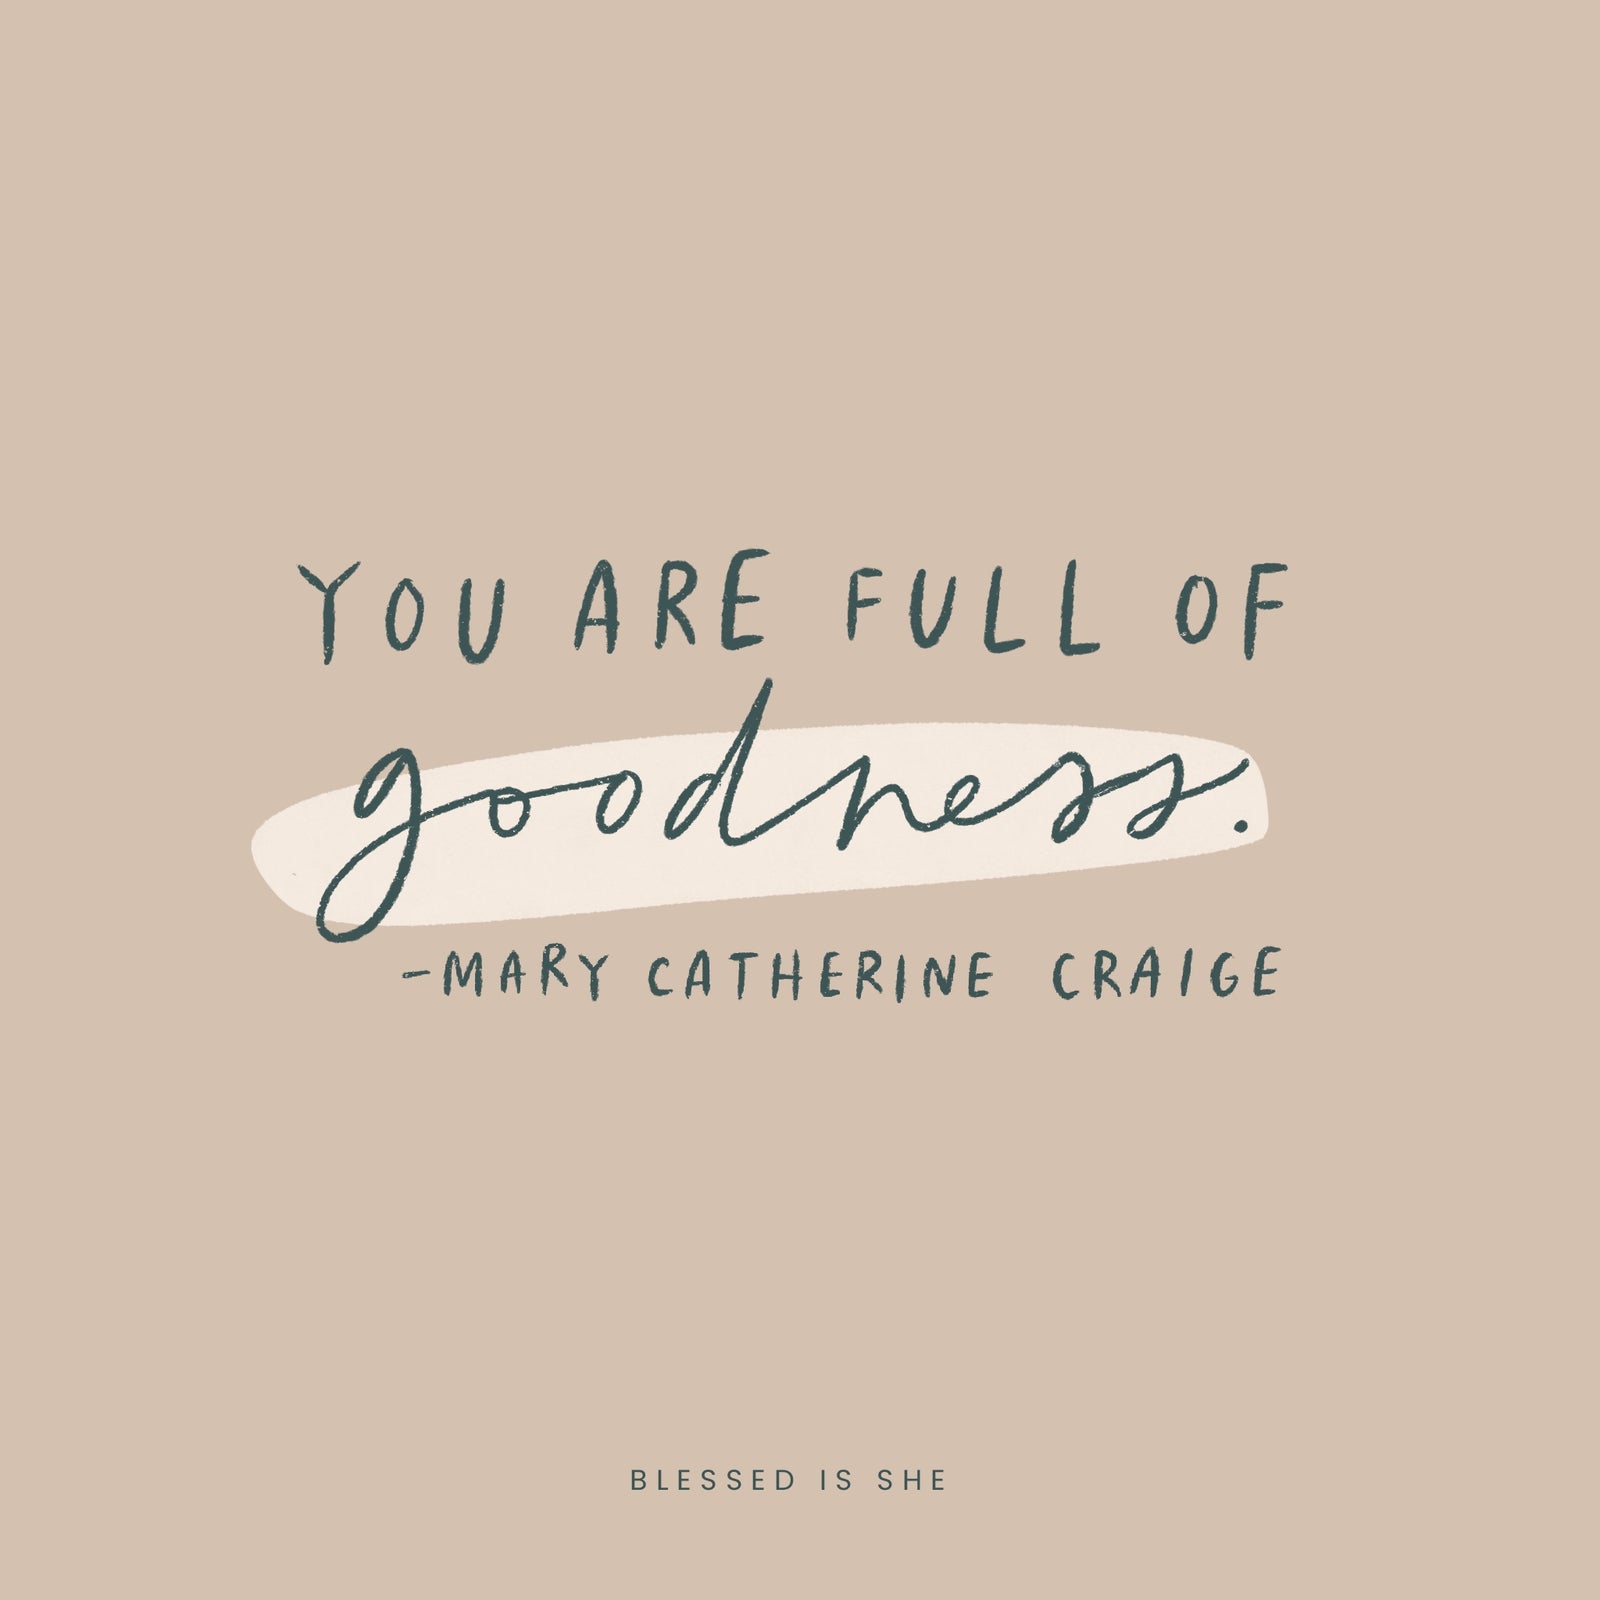 Convinced of Your Goodness